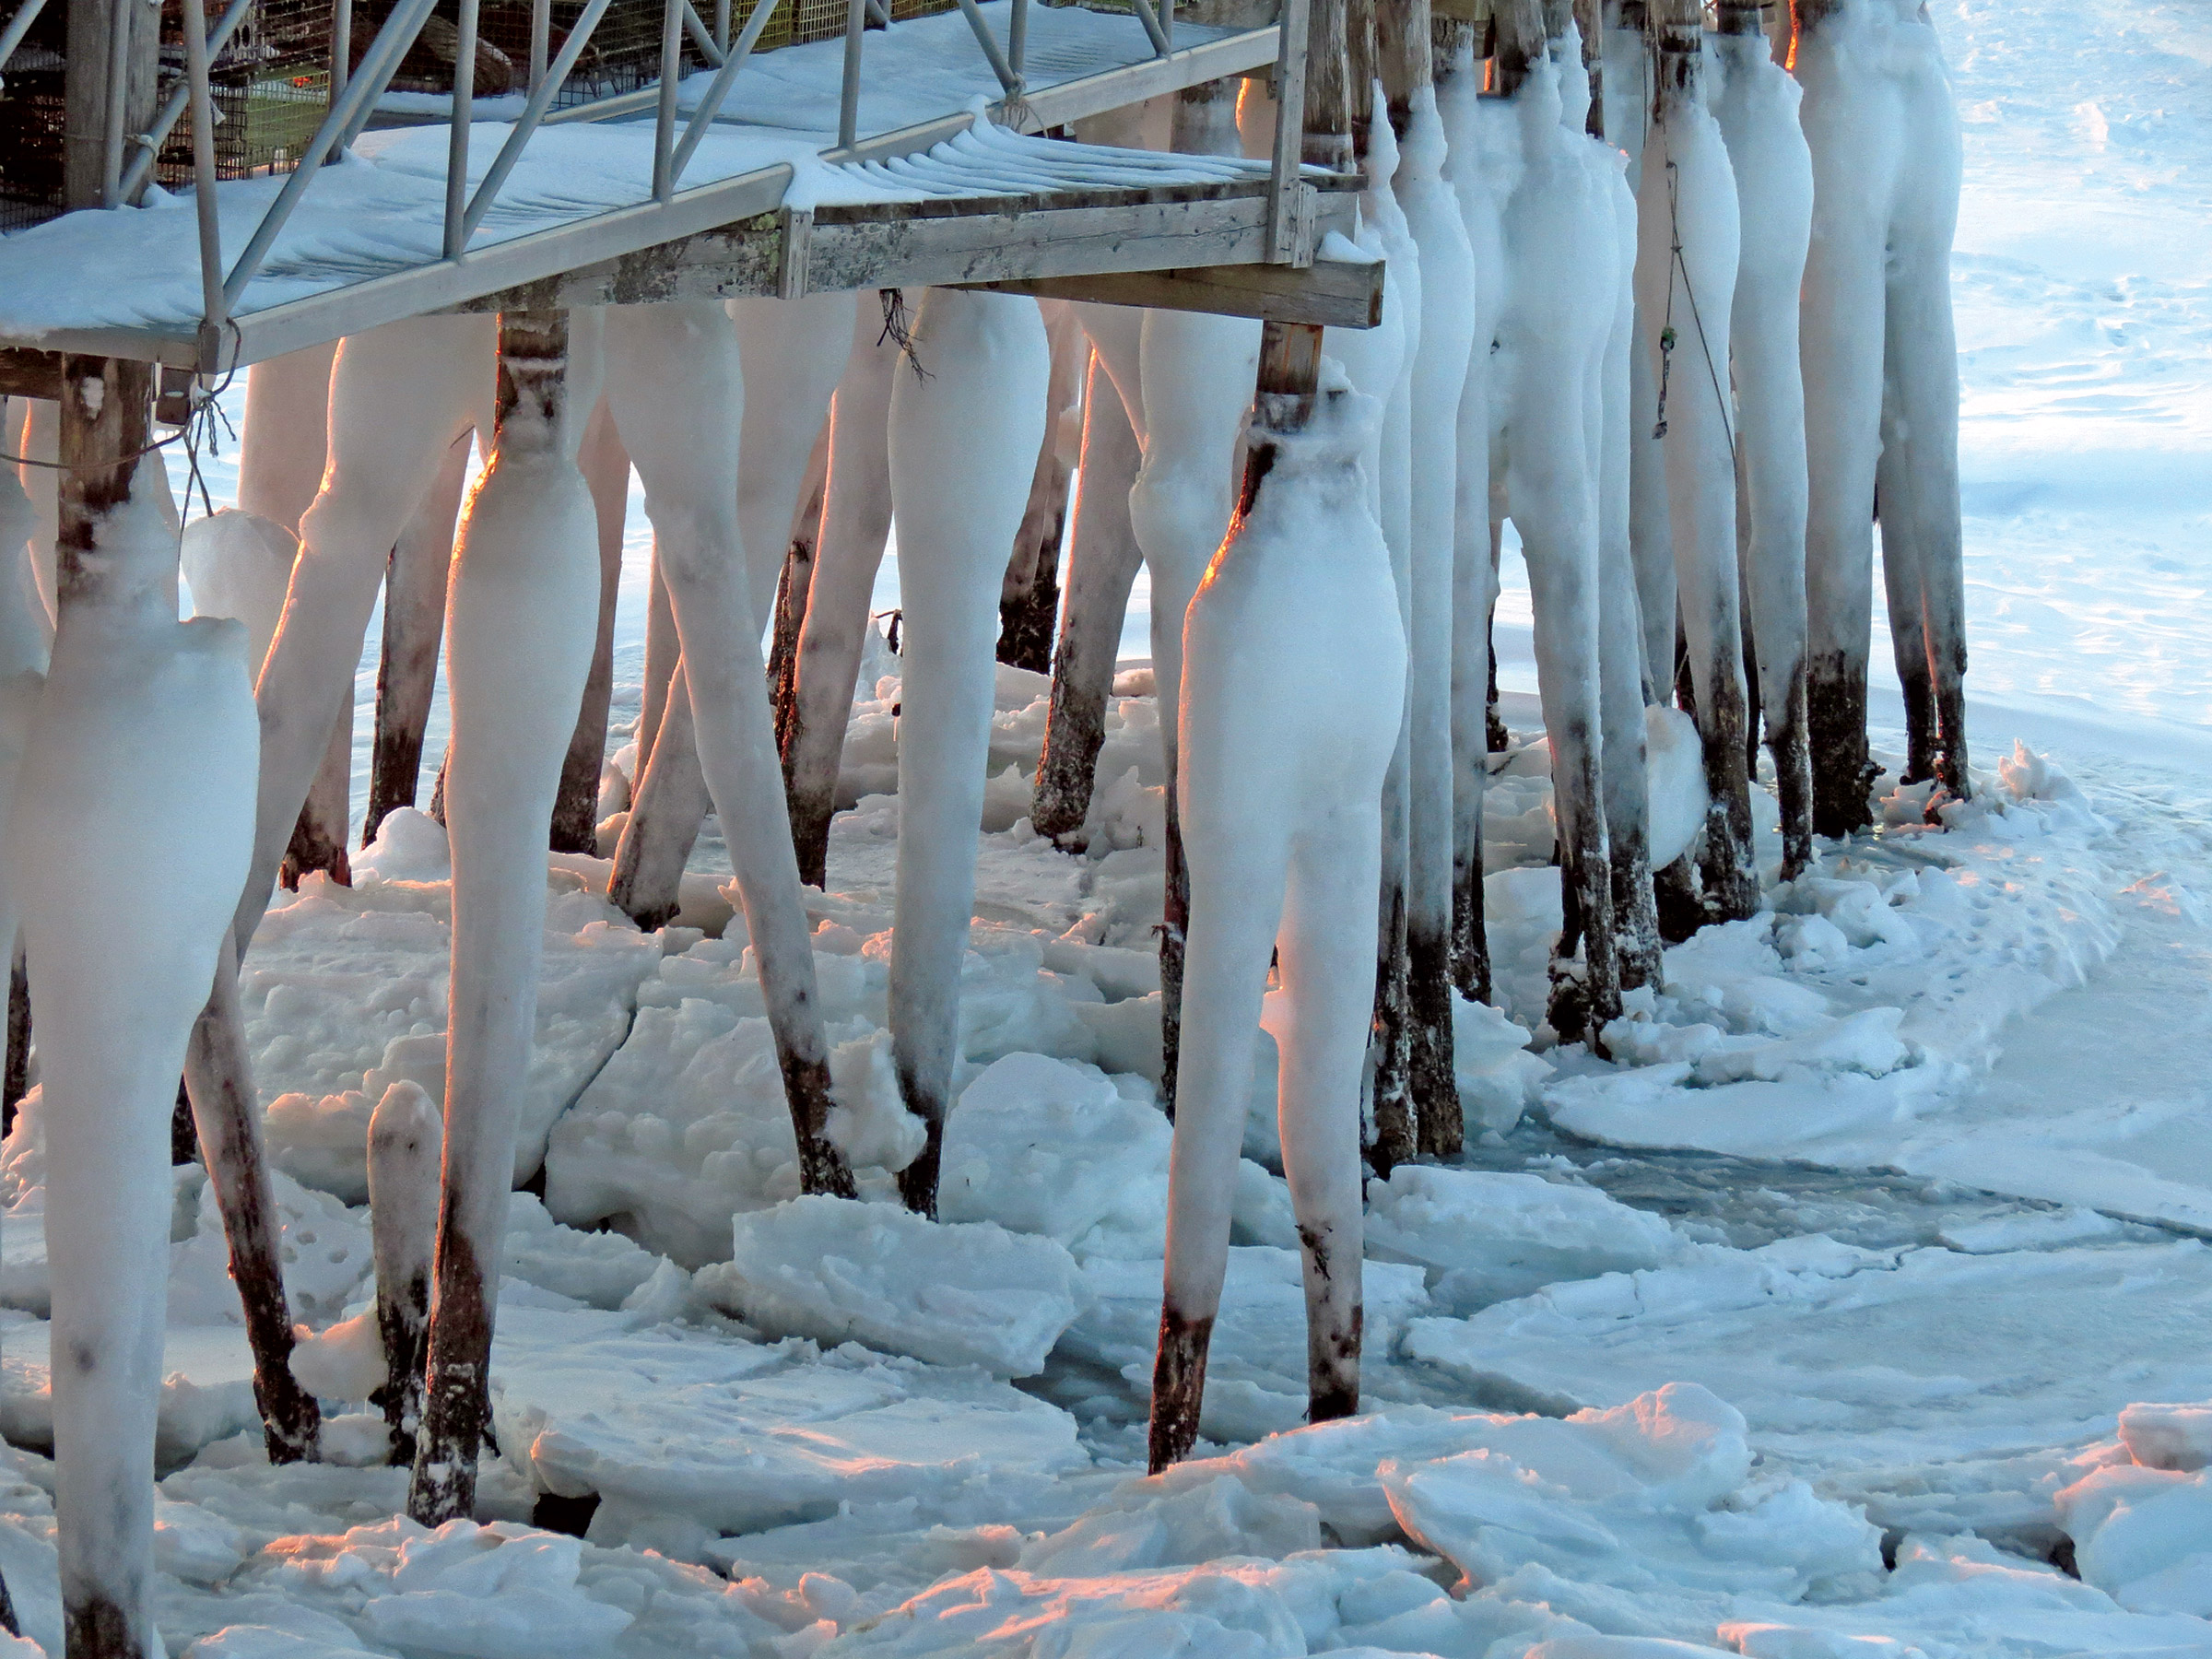 After a while the formations of ice on the pilings of TLC wharf began to look to me like human legs wearing white long-johns.  (Diane Cowan photo)